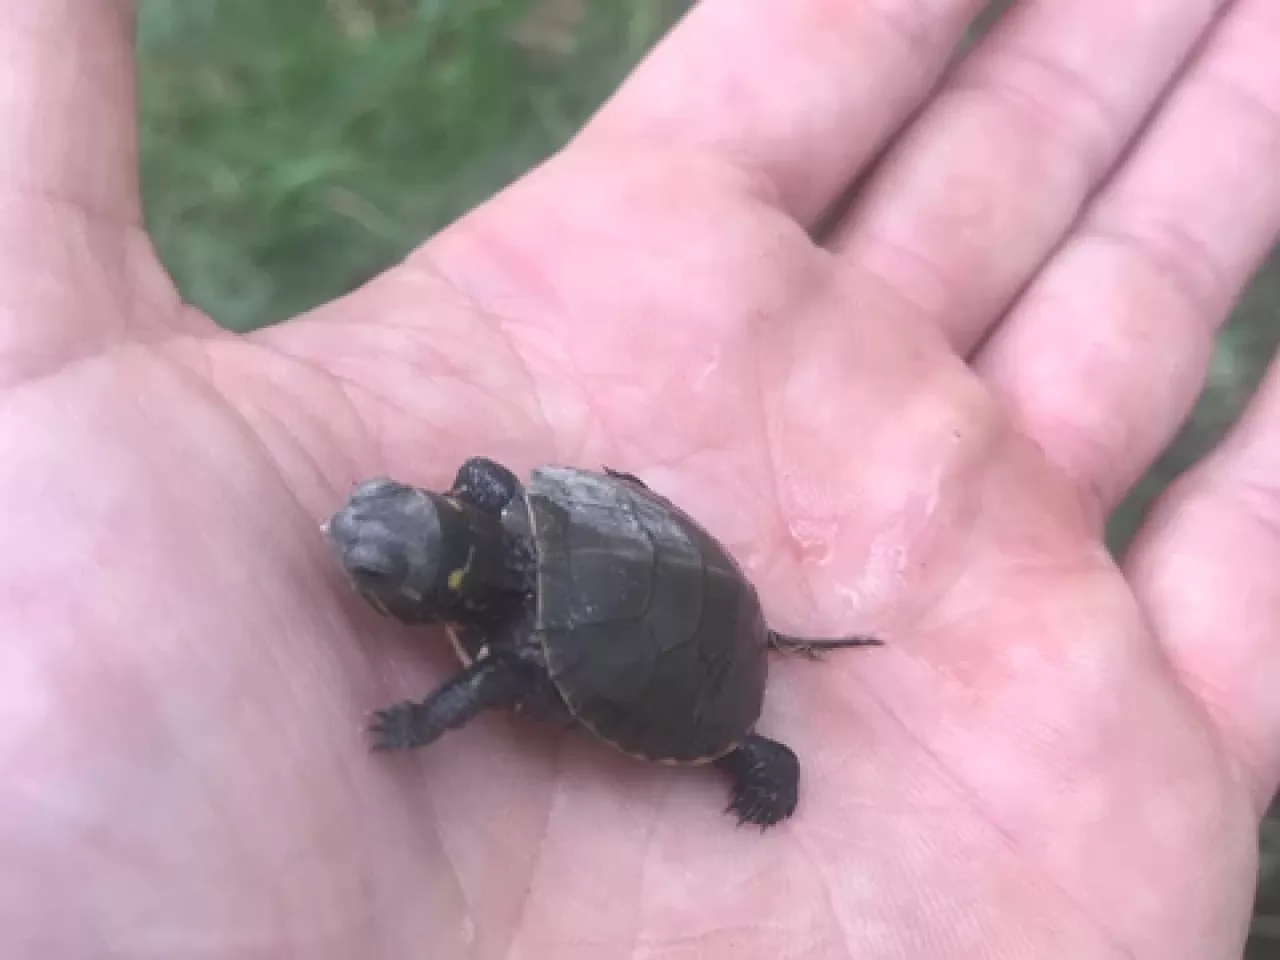 A small turtle in the palm of a hand